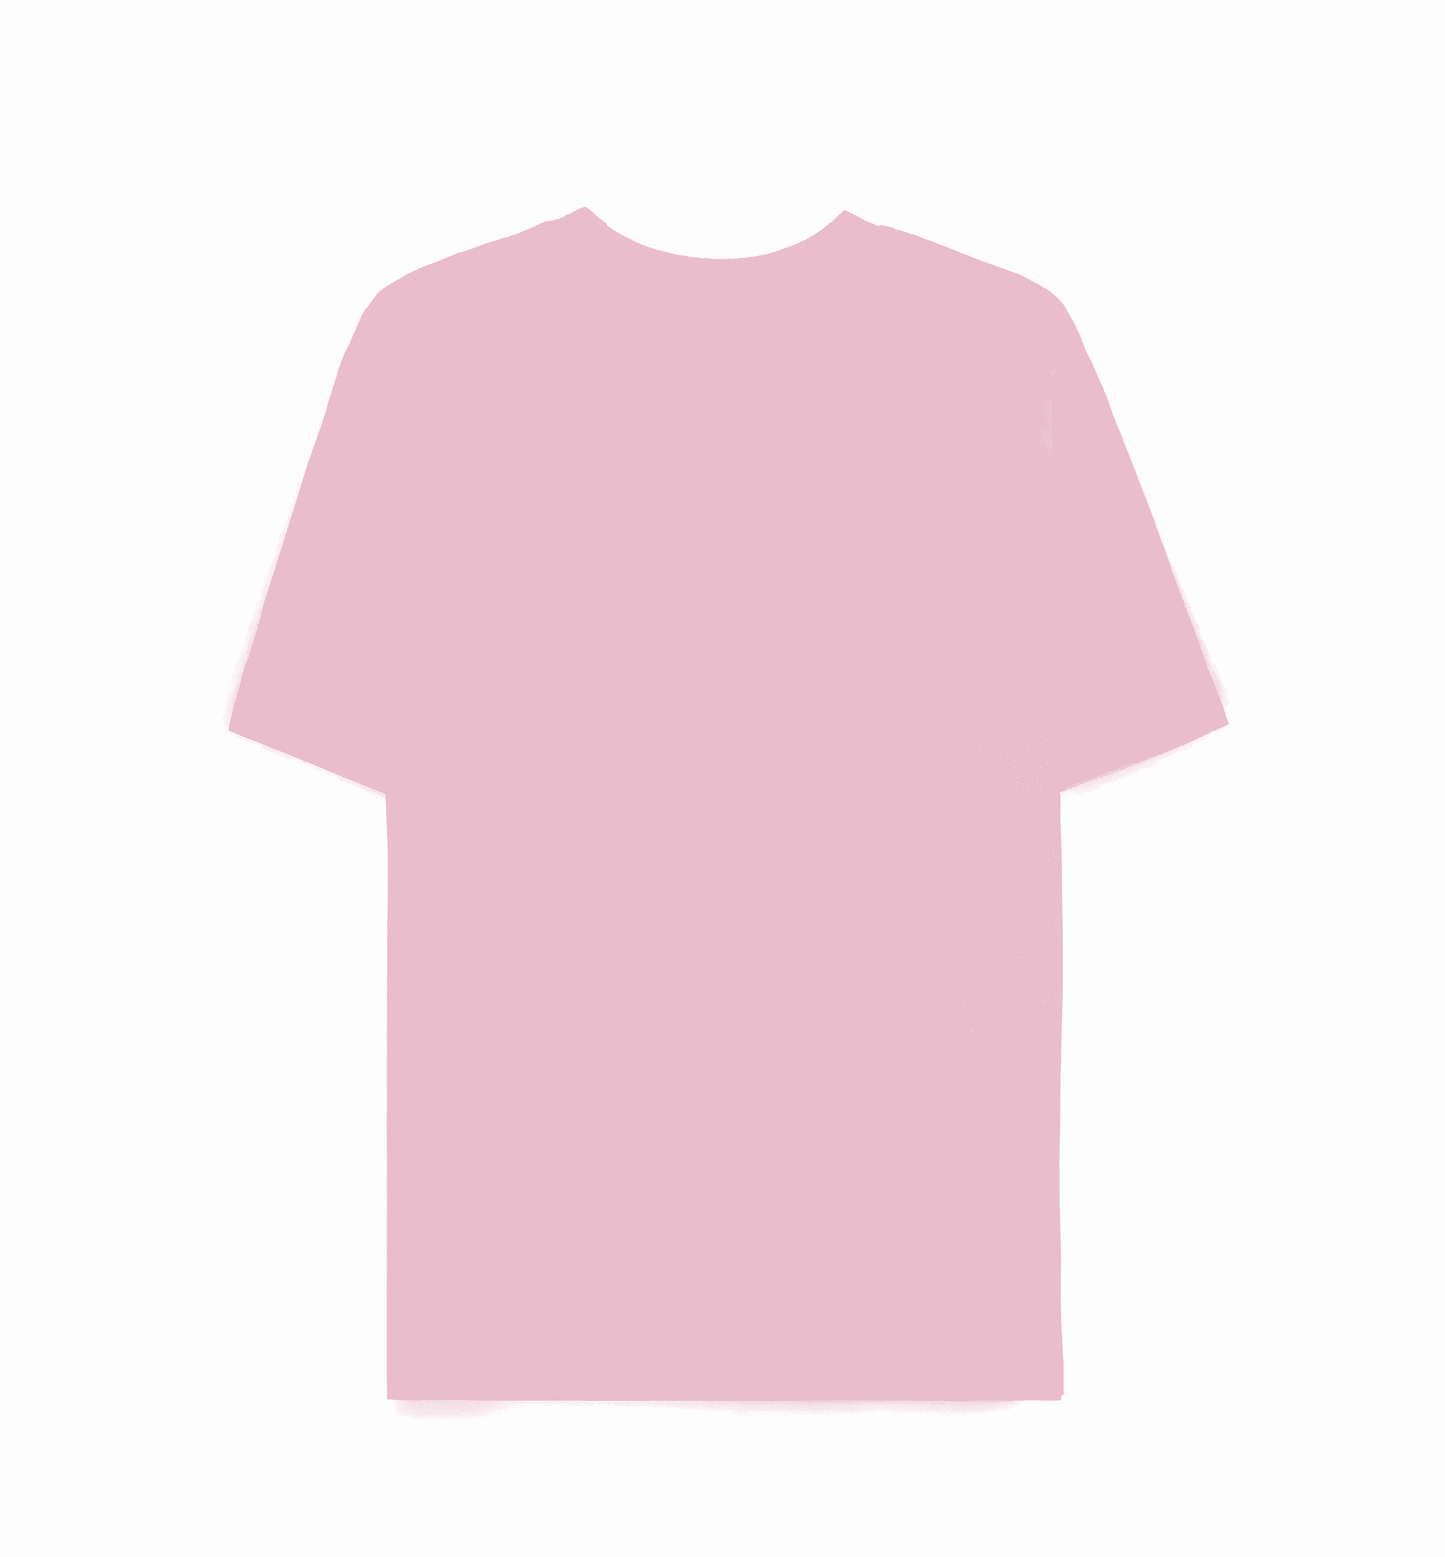 Pink short-sleeved T-shirt featuring Hatsune Miku graphic on a white background